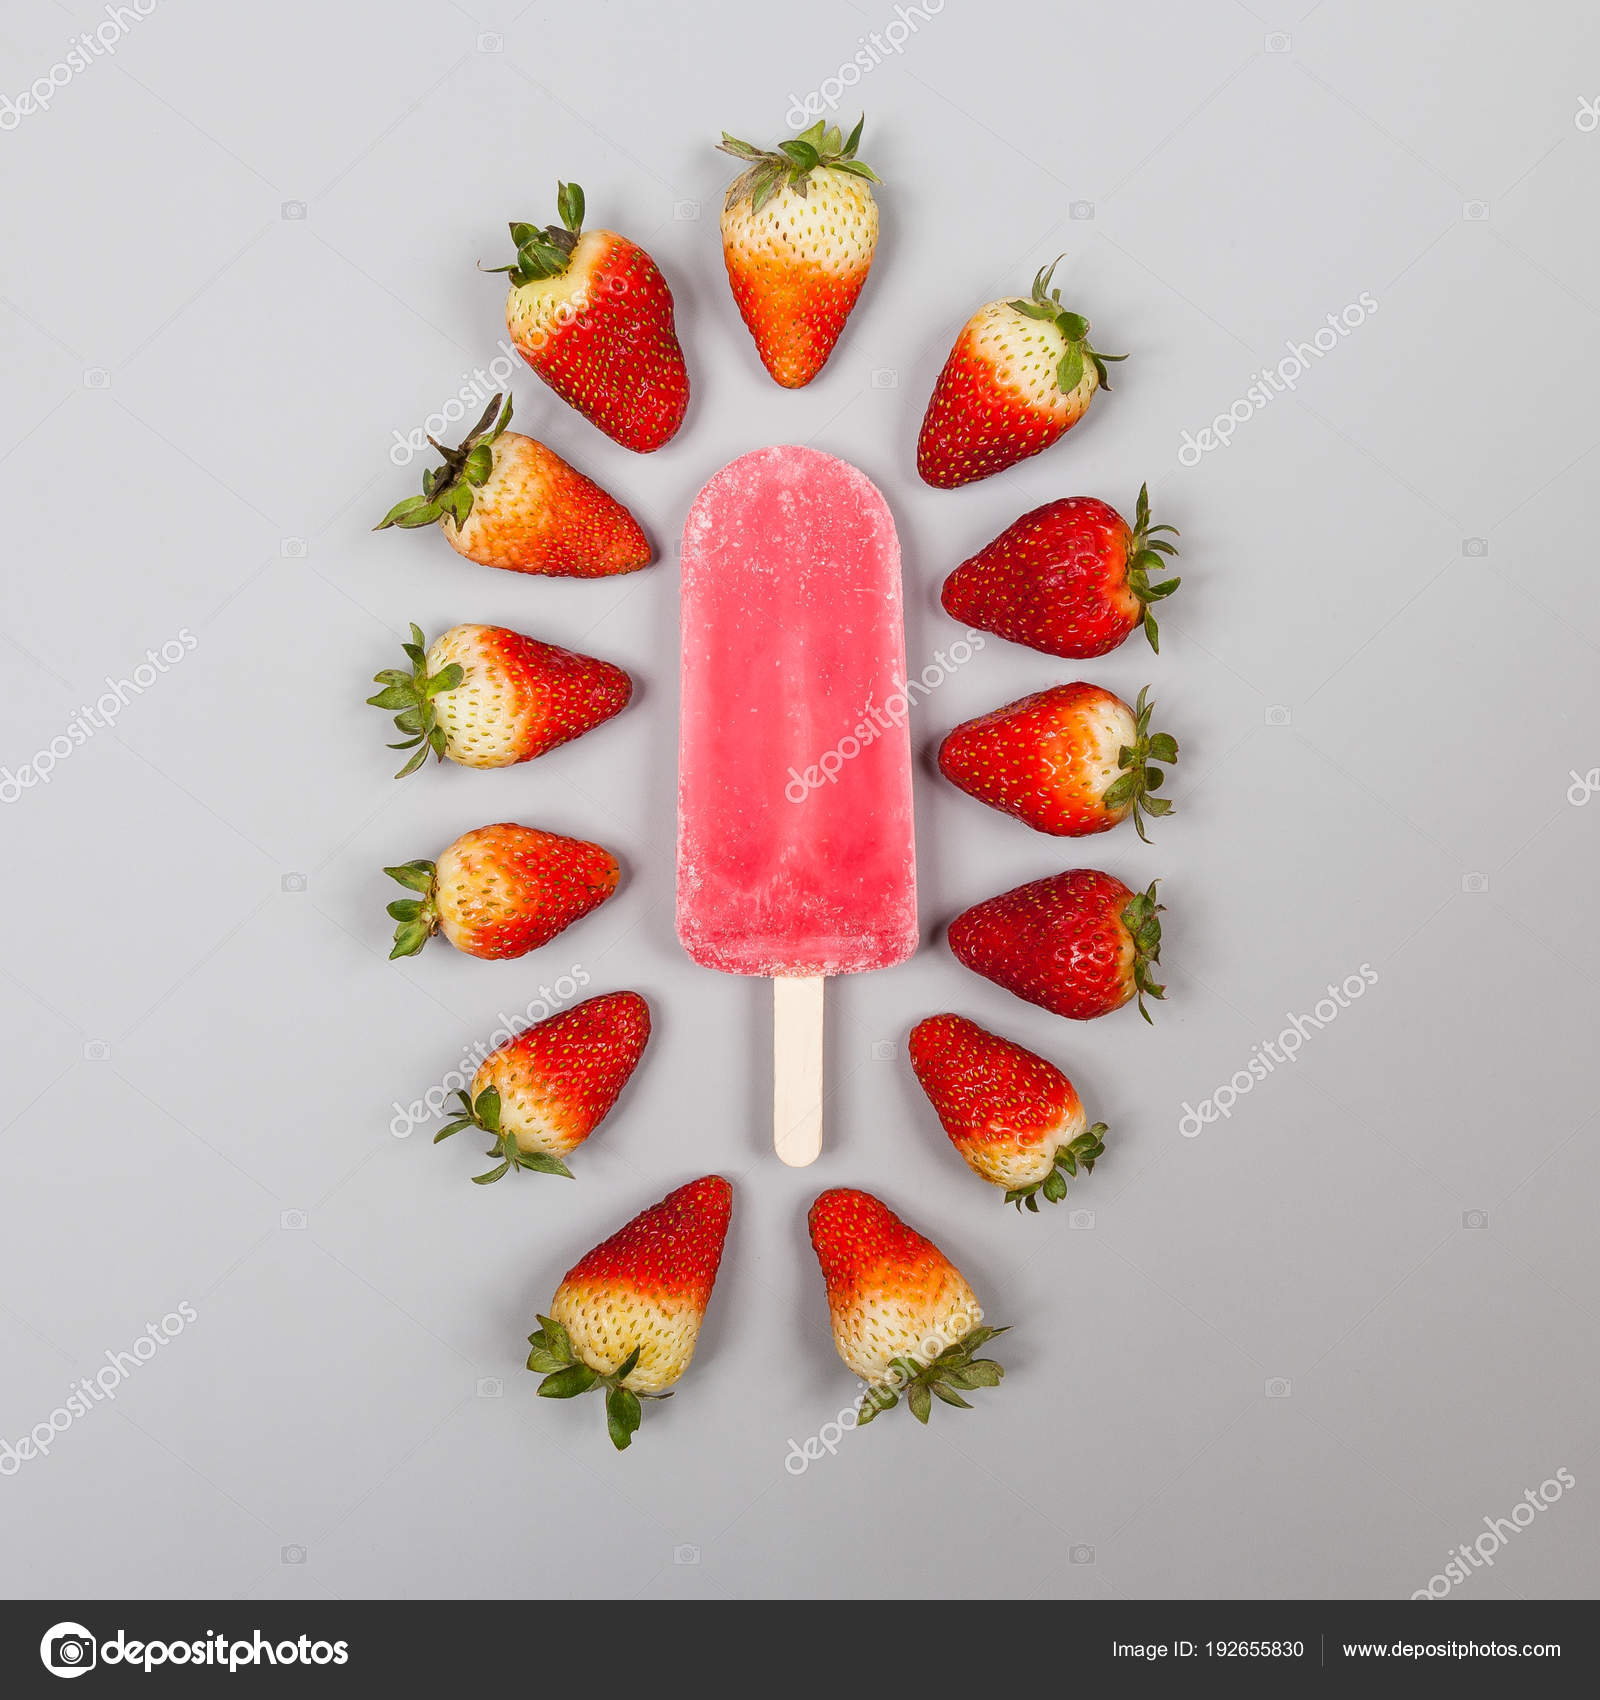 Tasty and refreshing strawberry flavor popsicles